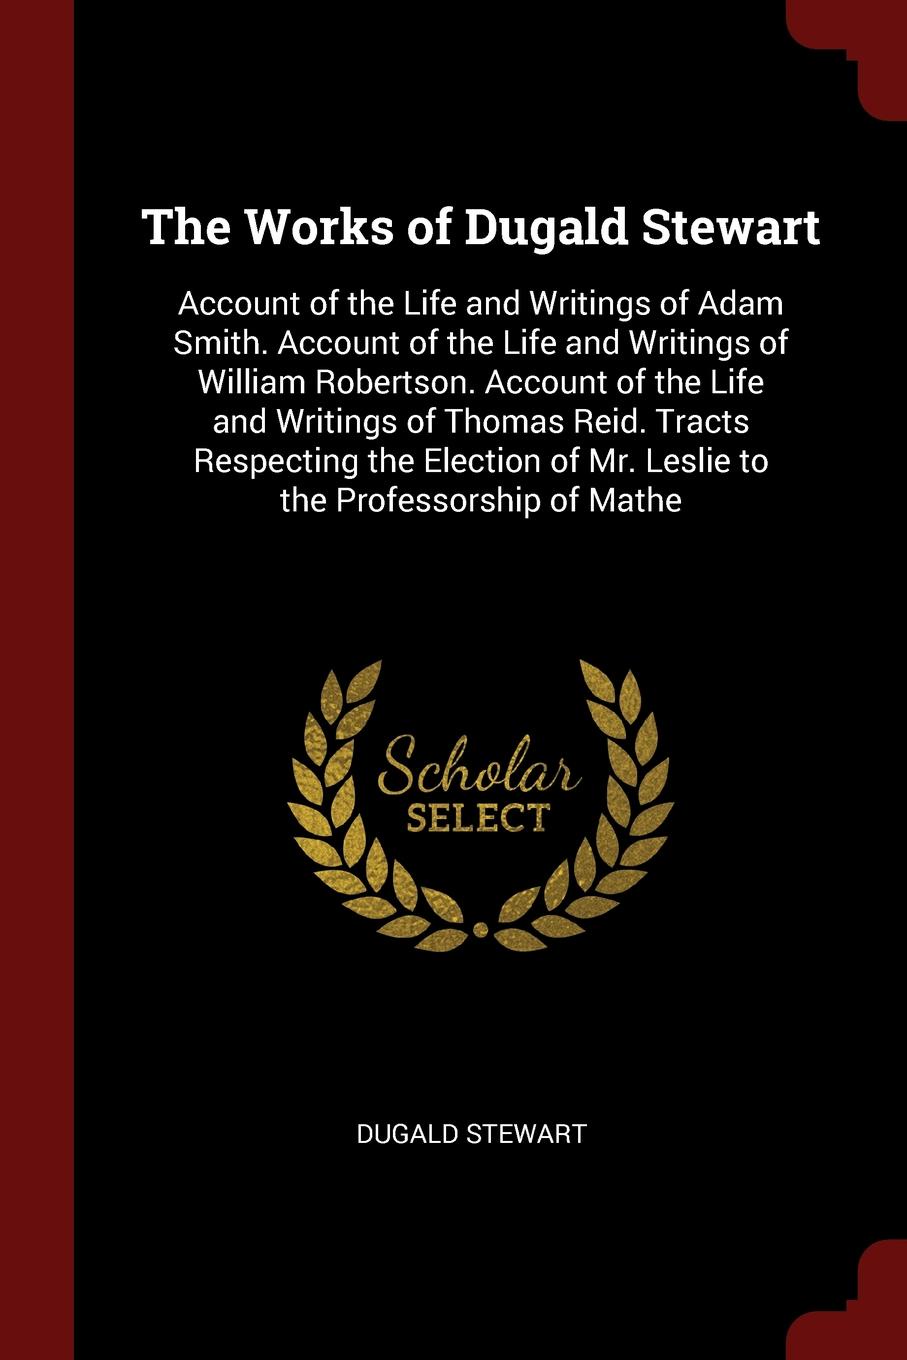 The Works of Dugald Stewart. Account of the Life and Writings of Adam Smith. Account of the Life and Writings of William Robertson. Account of the Life and Writings of Thomas Reid. Tracts Respecting the Election of Mr. Leslie to the Professorship ...